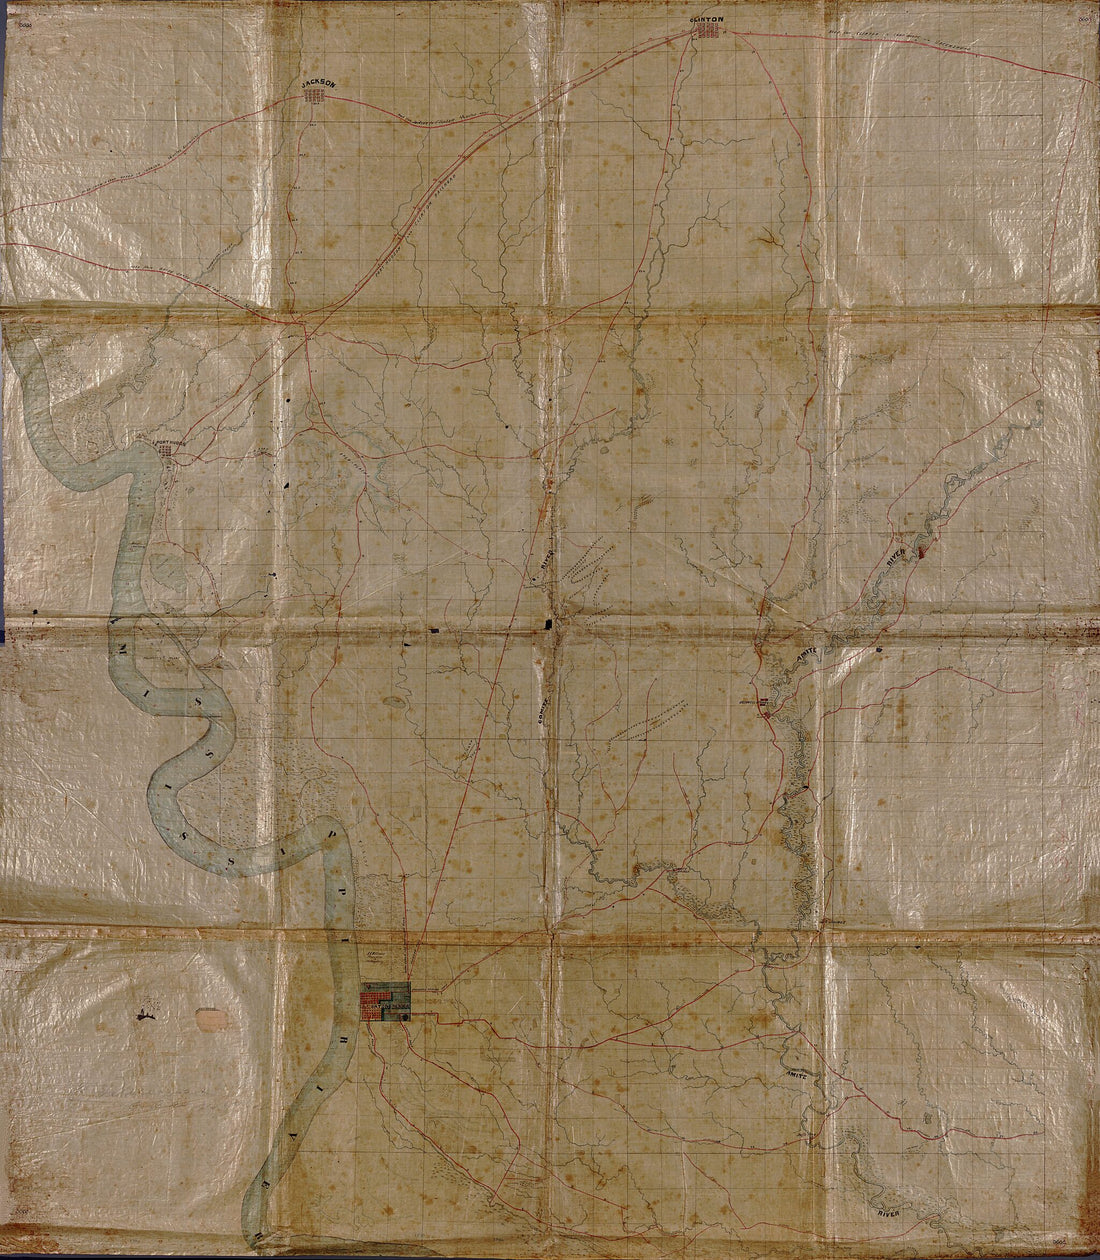 This old map of Map of the Region East and North of Baton Rouge, Showing Batteries On the Mississippi North of Port Hudson from 1863 was created by John S. Clark in 1863